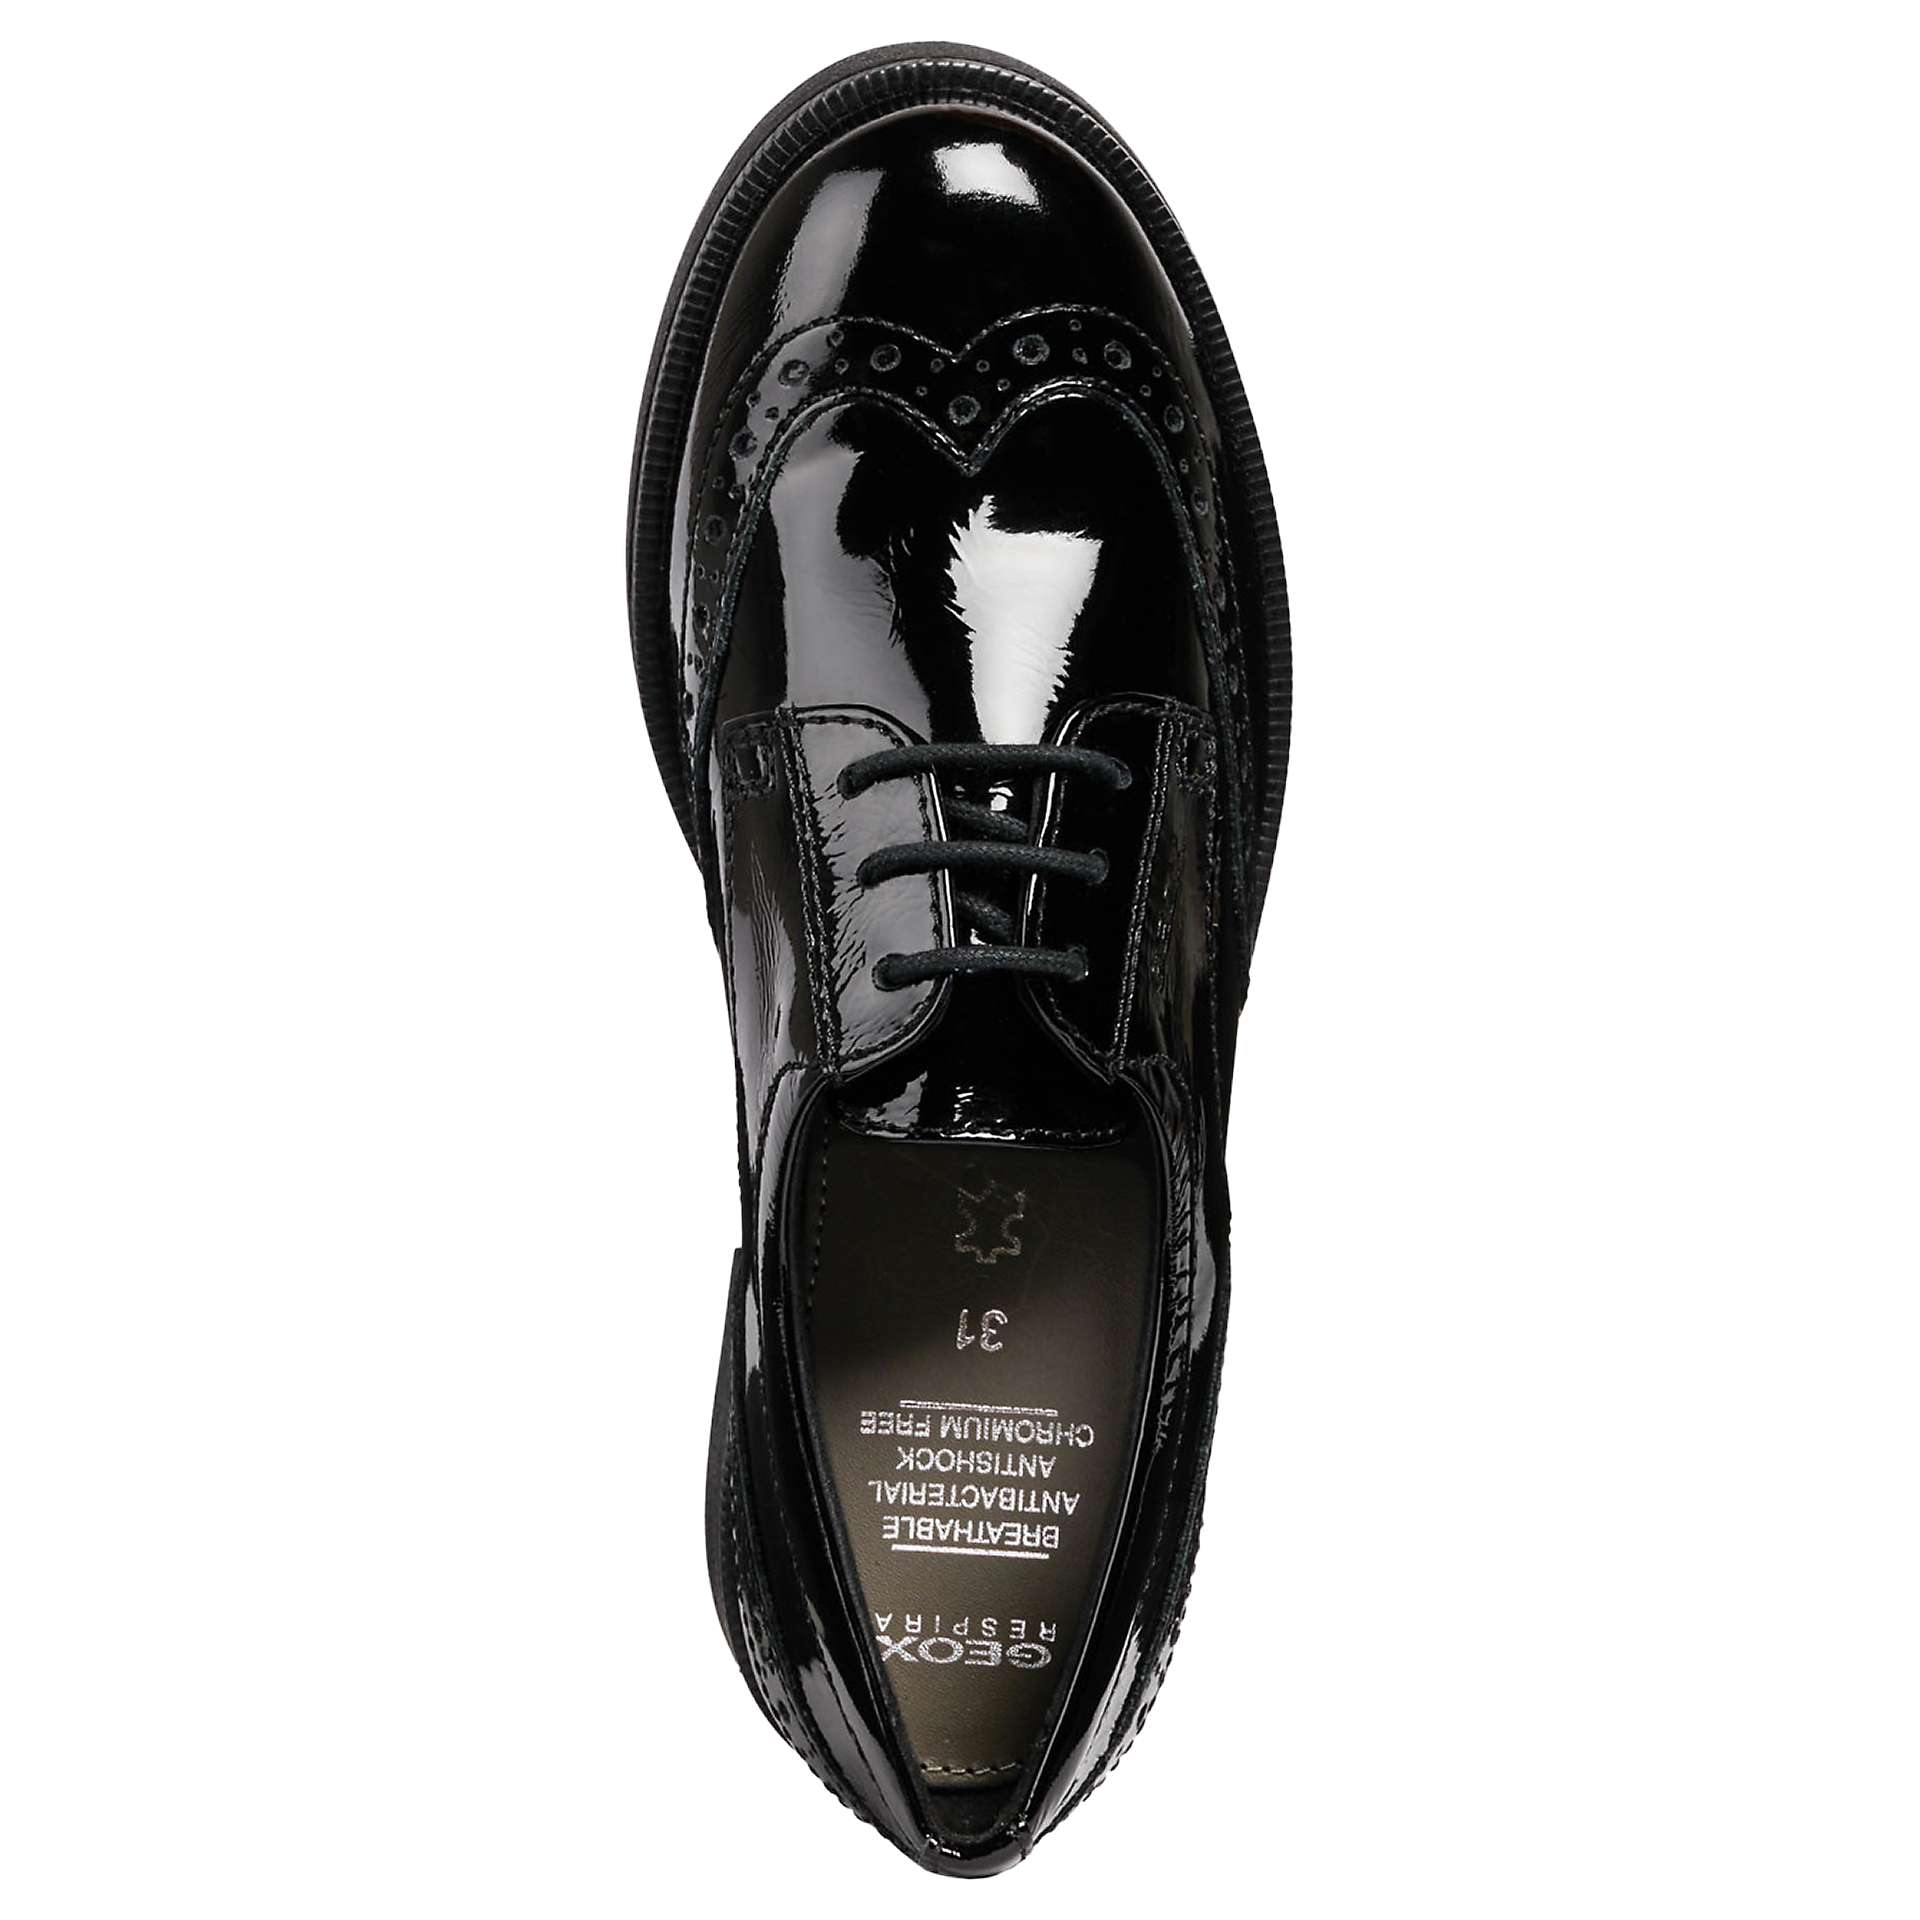 Buy Geox Kids' Agata Lace-Up Brogue Shoes, Black Patent Online at johnlewis.com